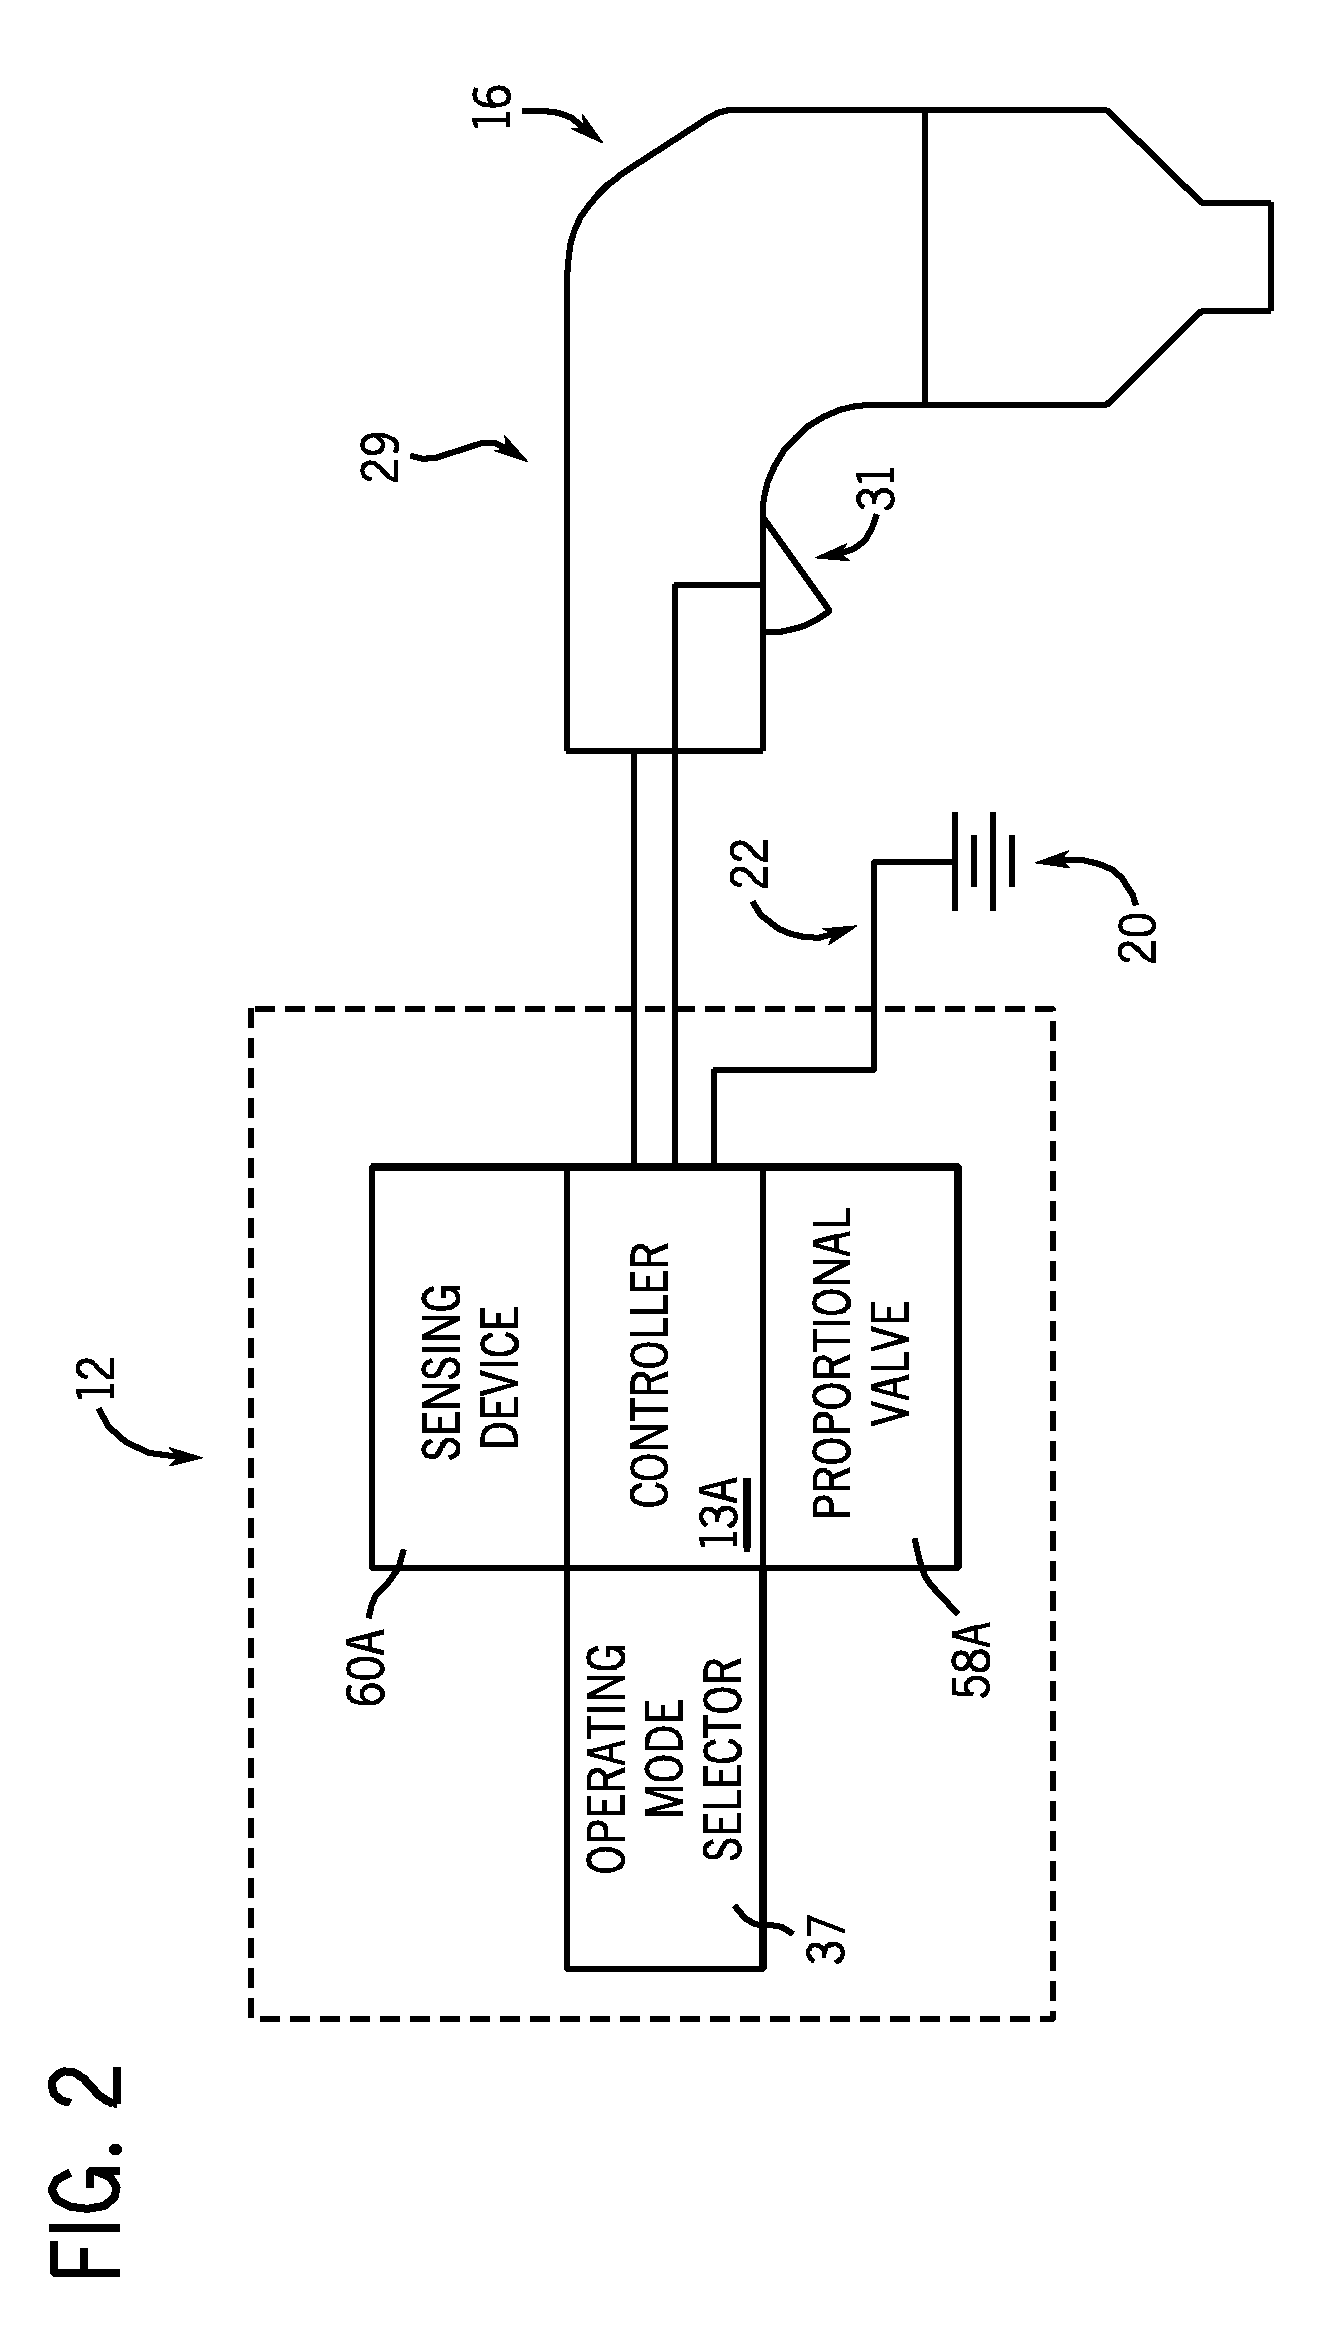 Method and apparatus for automatically controlling gas pressure for a plasma cutter